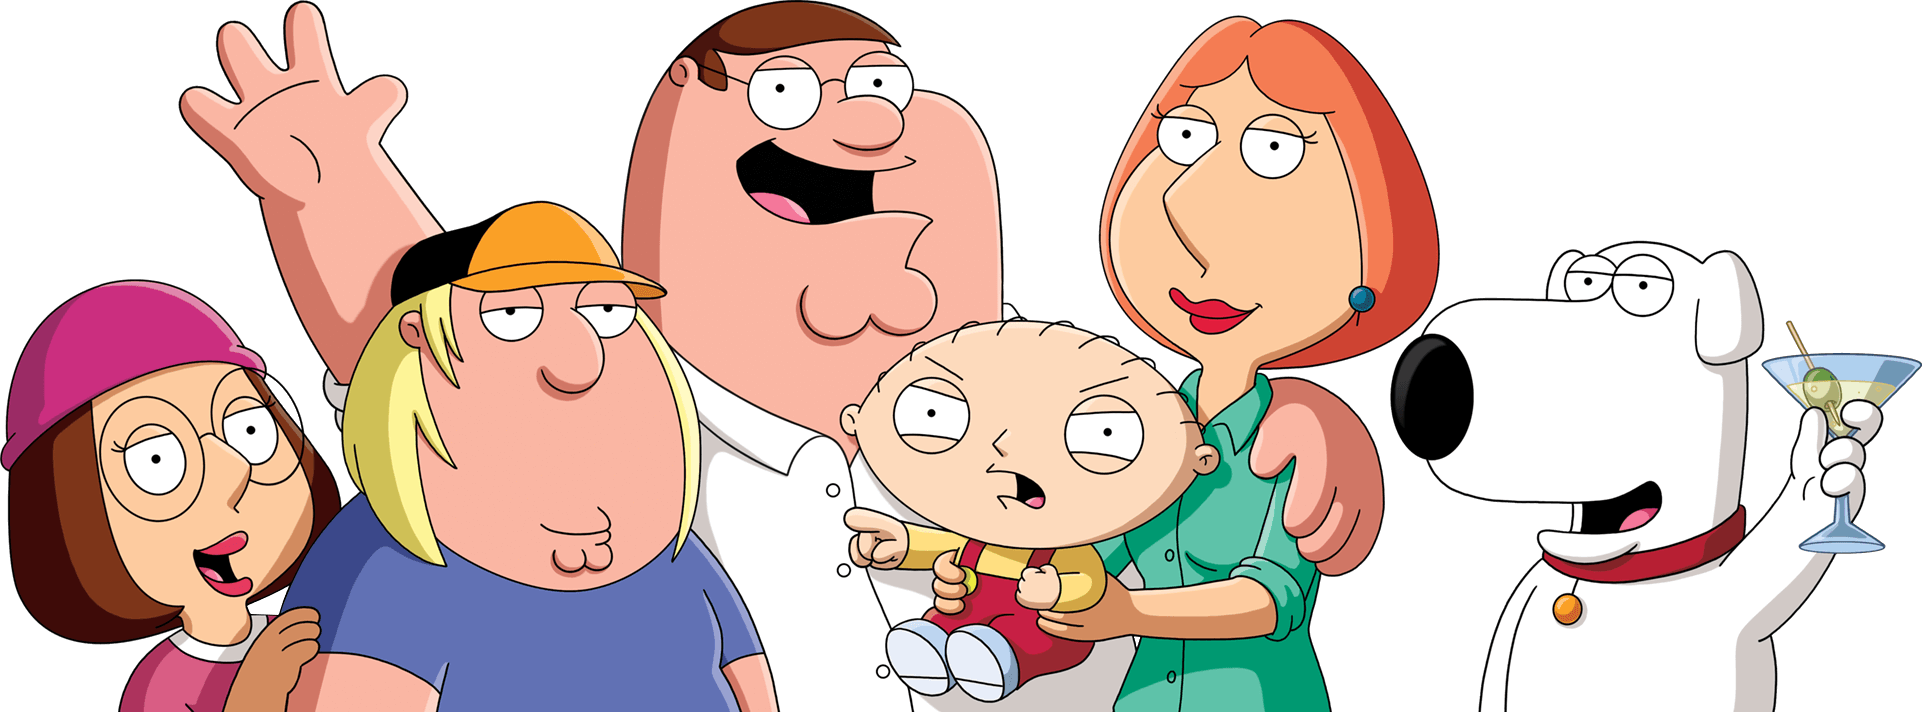 Family Guy Griffin Familyand Brian